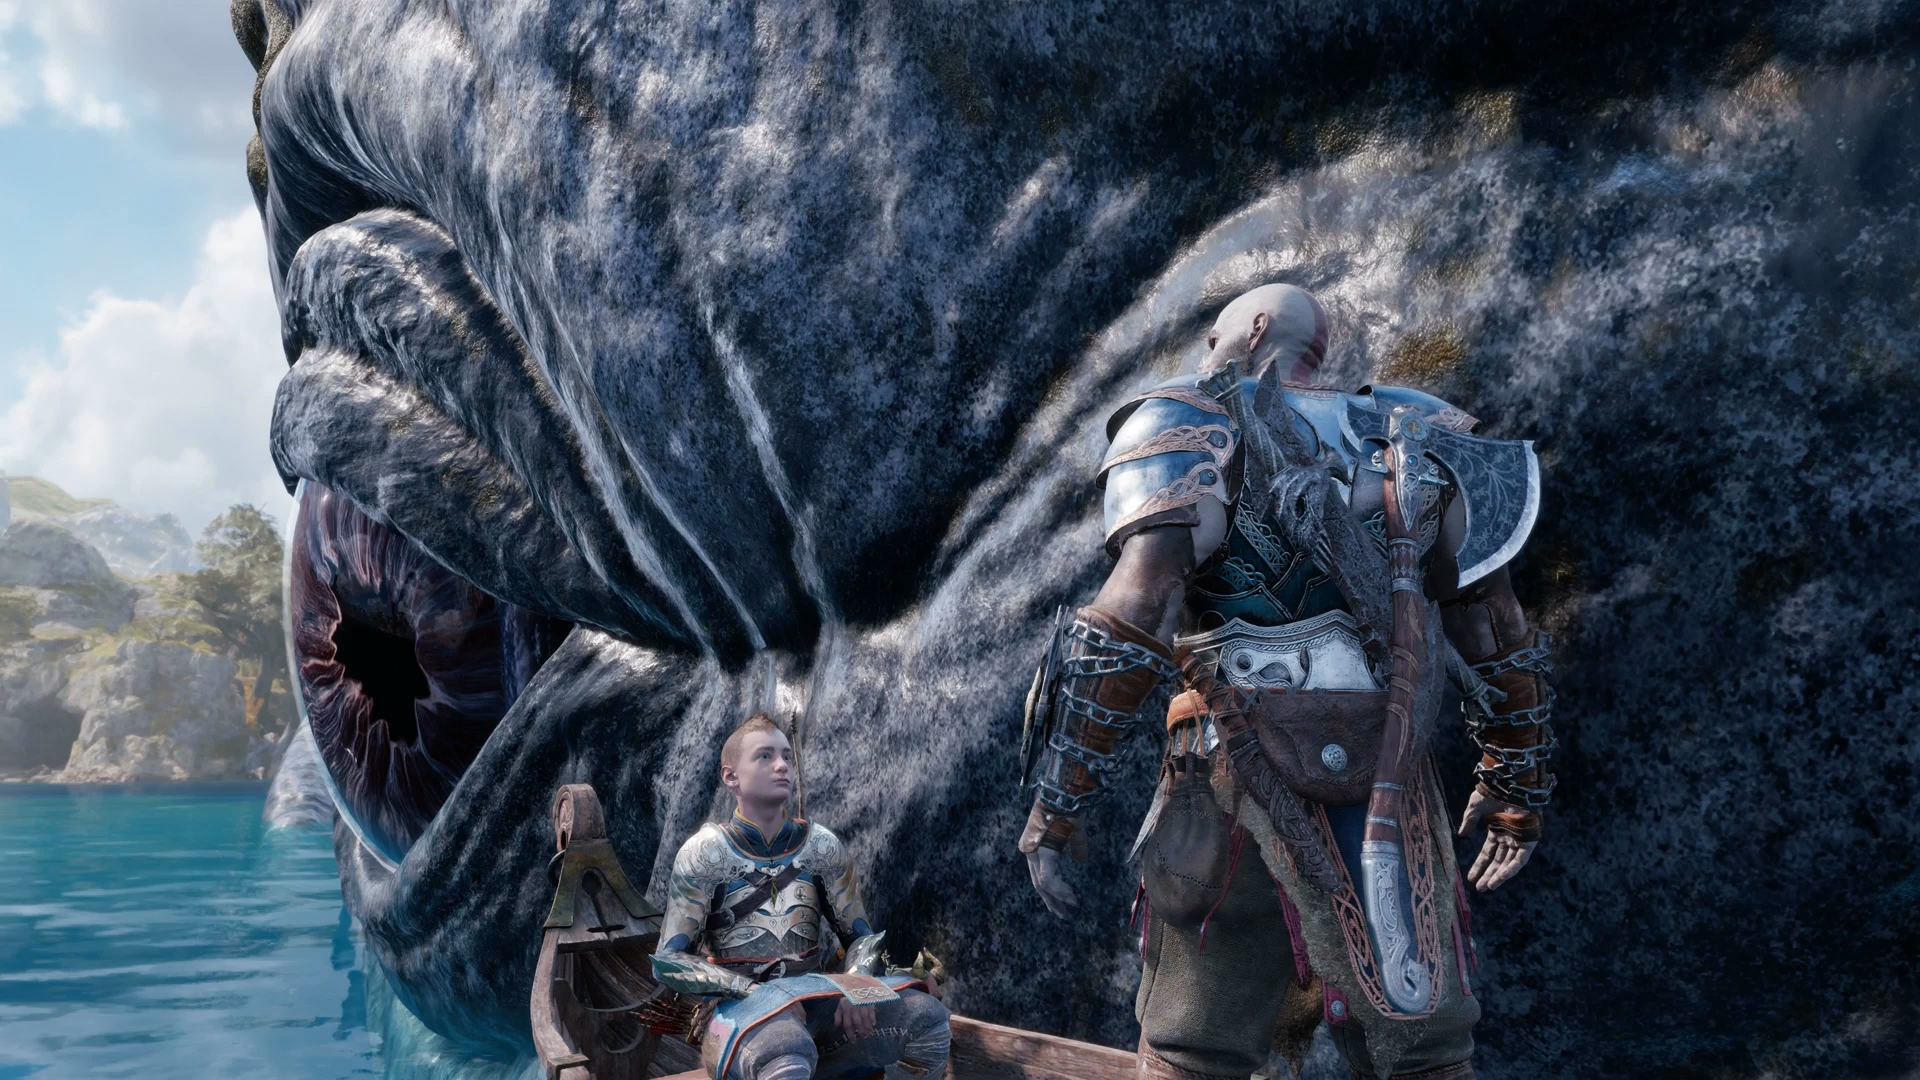 Kratos, Atreus and Mimir sail up alongside the Lyngbakr during The Weight of Chains in God of War Ragnarok